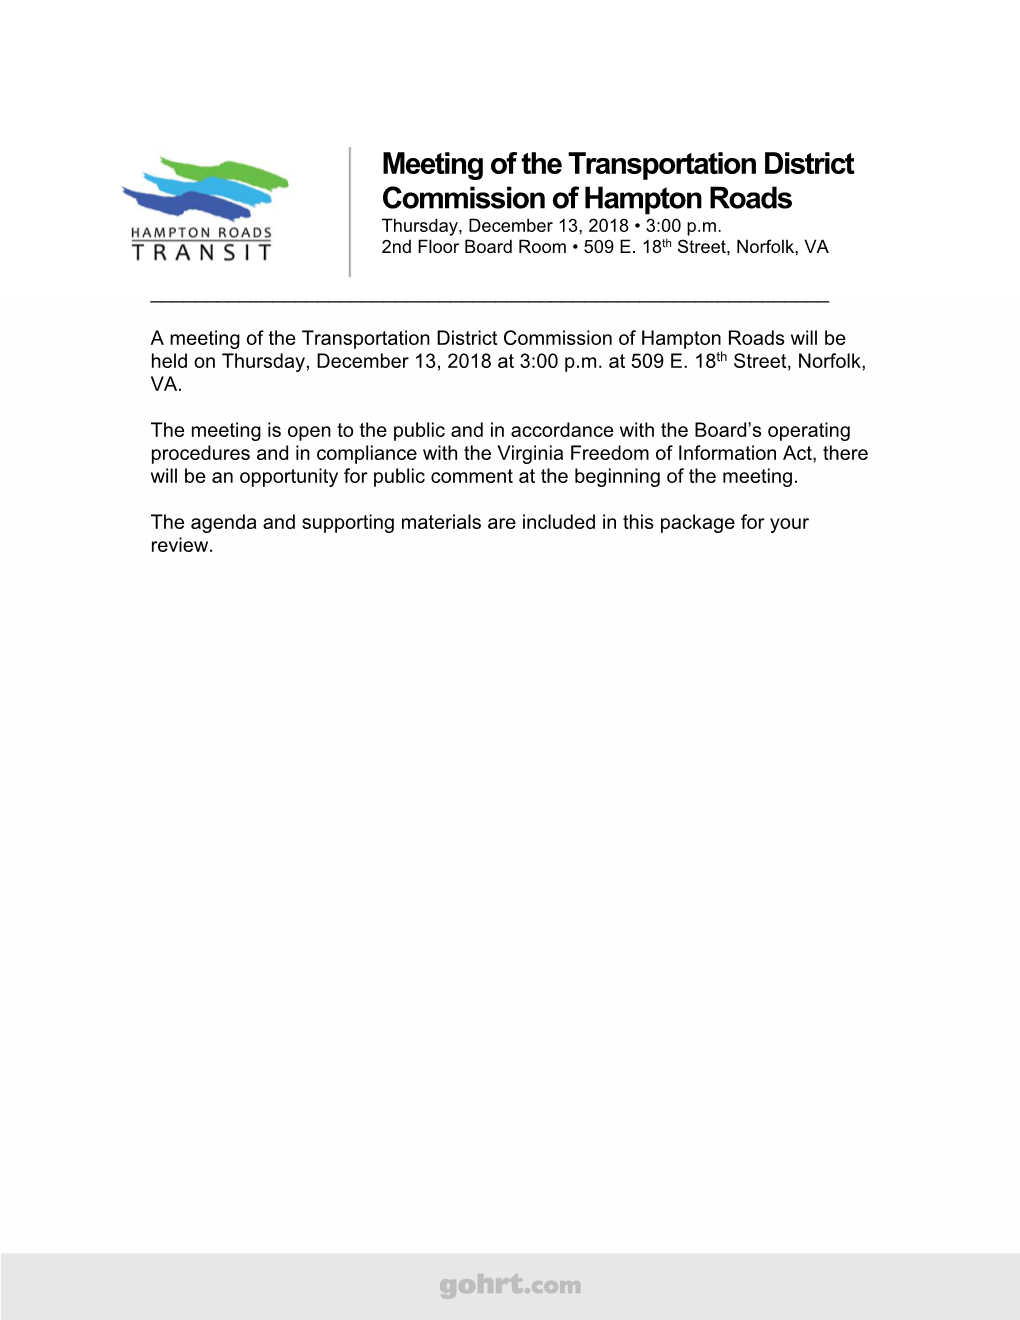 Meeting of the Transportation District Commission of Hampton Roads Thursday, December 13, 2018 • 3:00 P.M